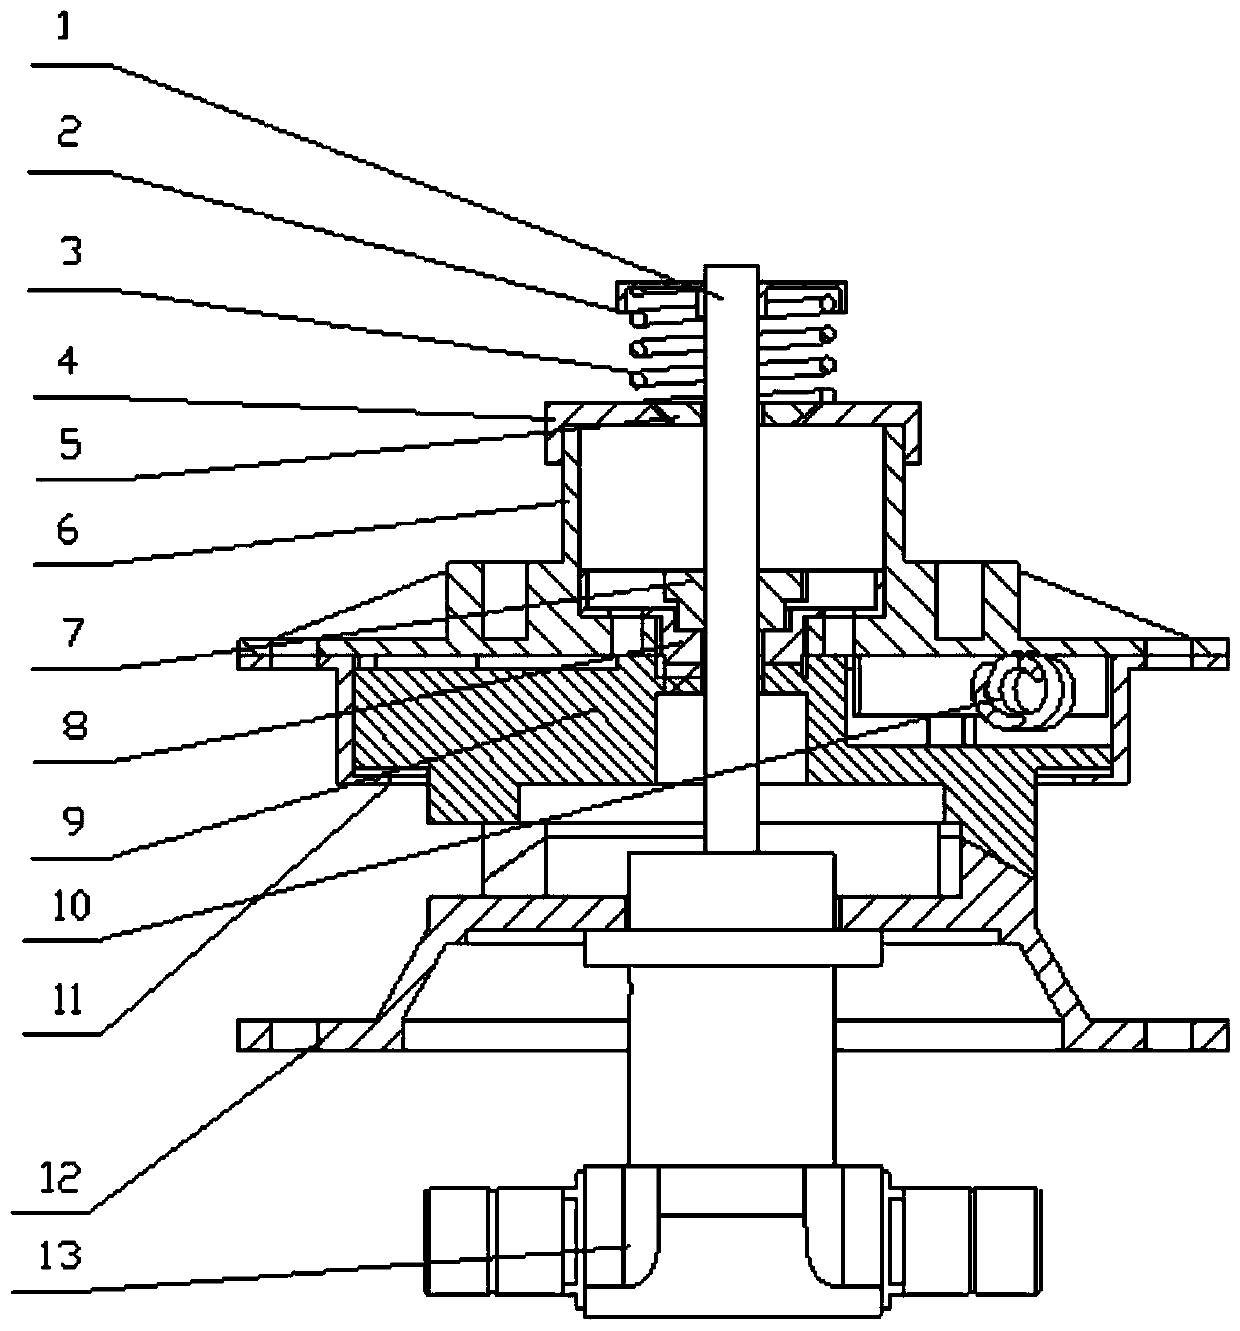 A rotary low-impact self-separating pressing and releasing device